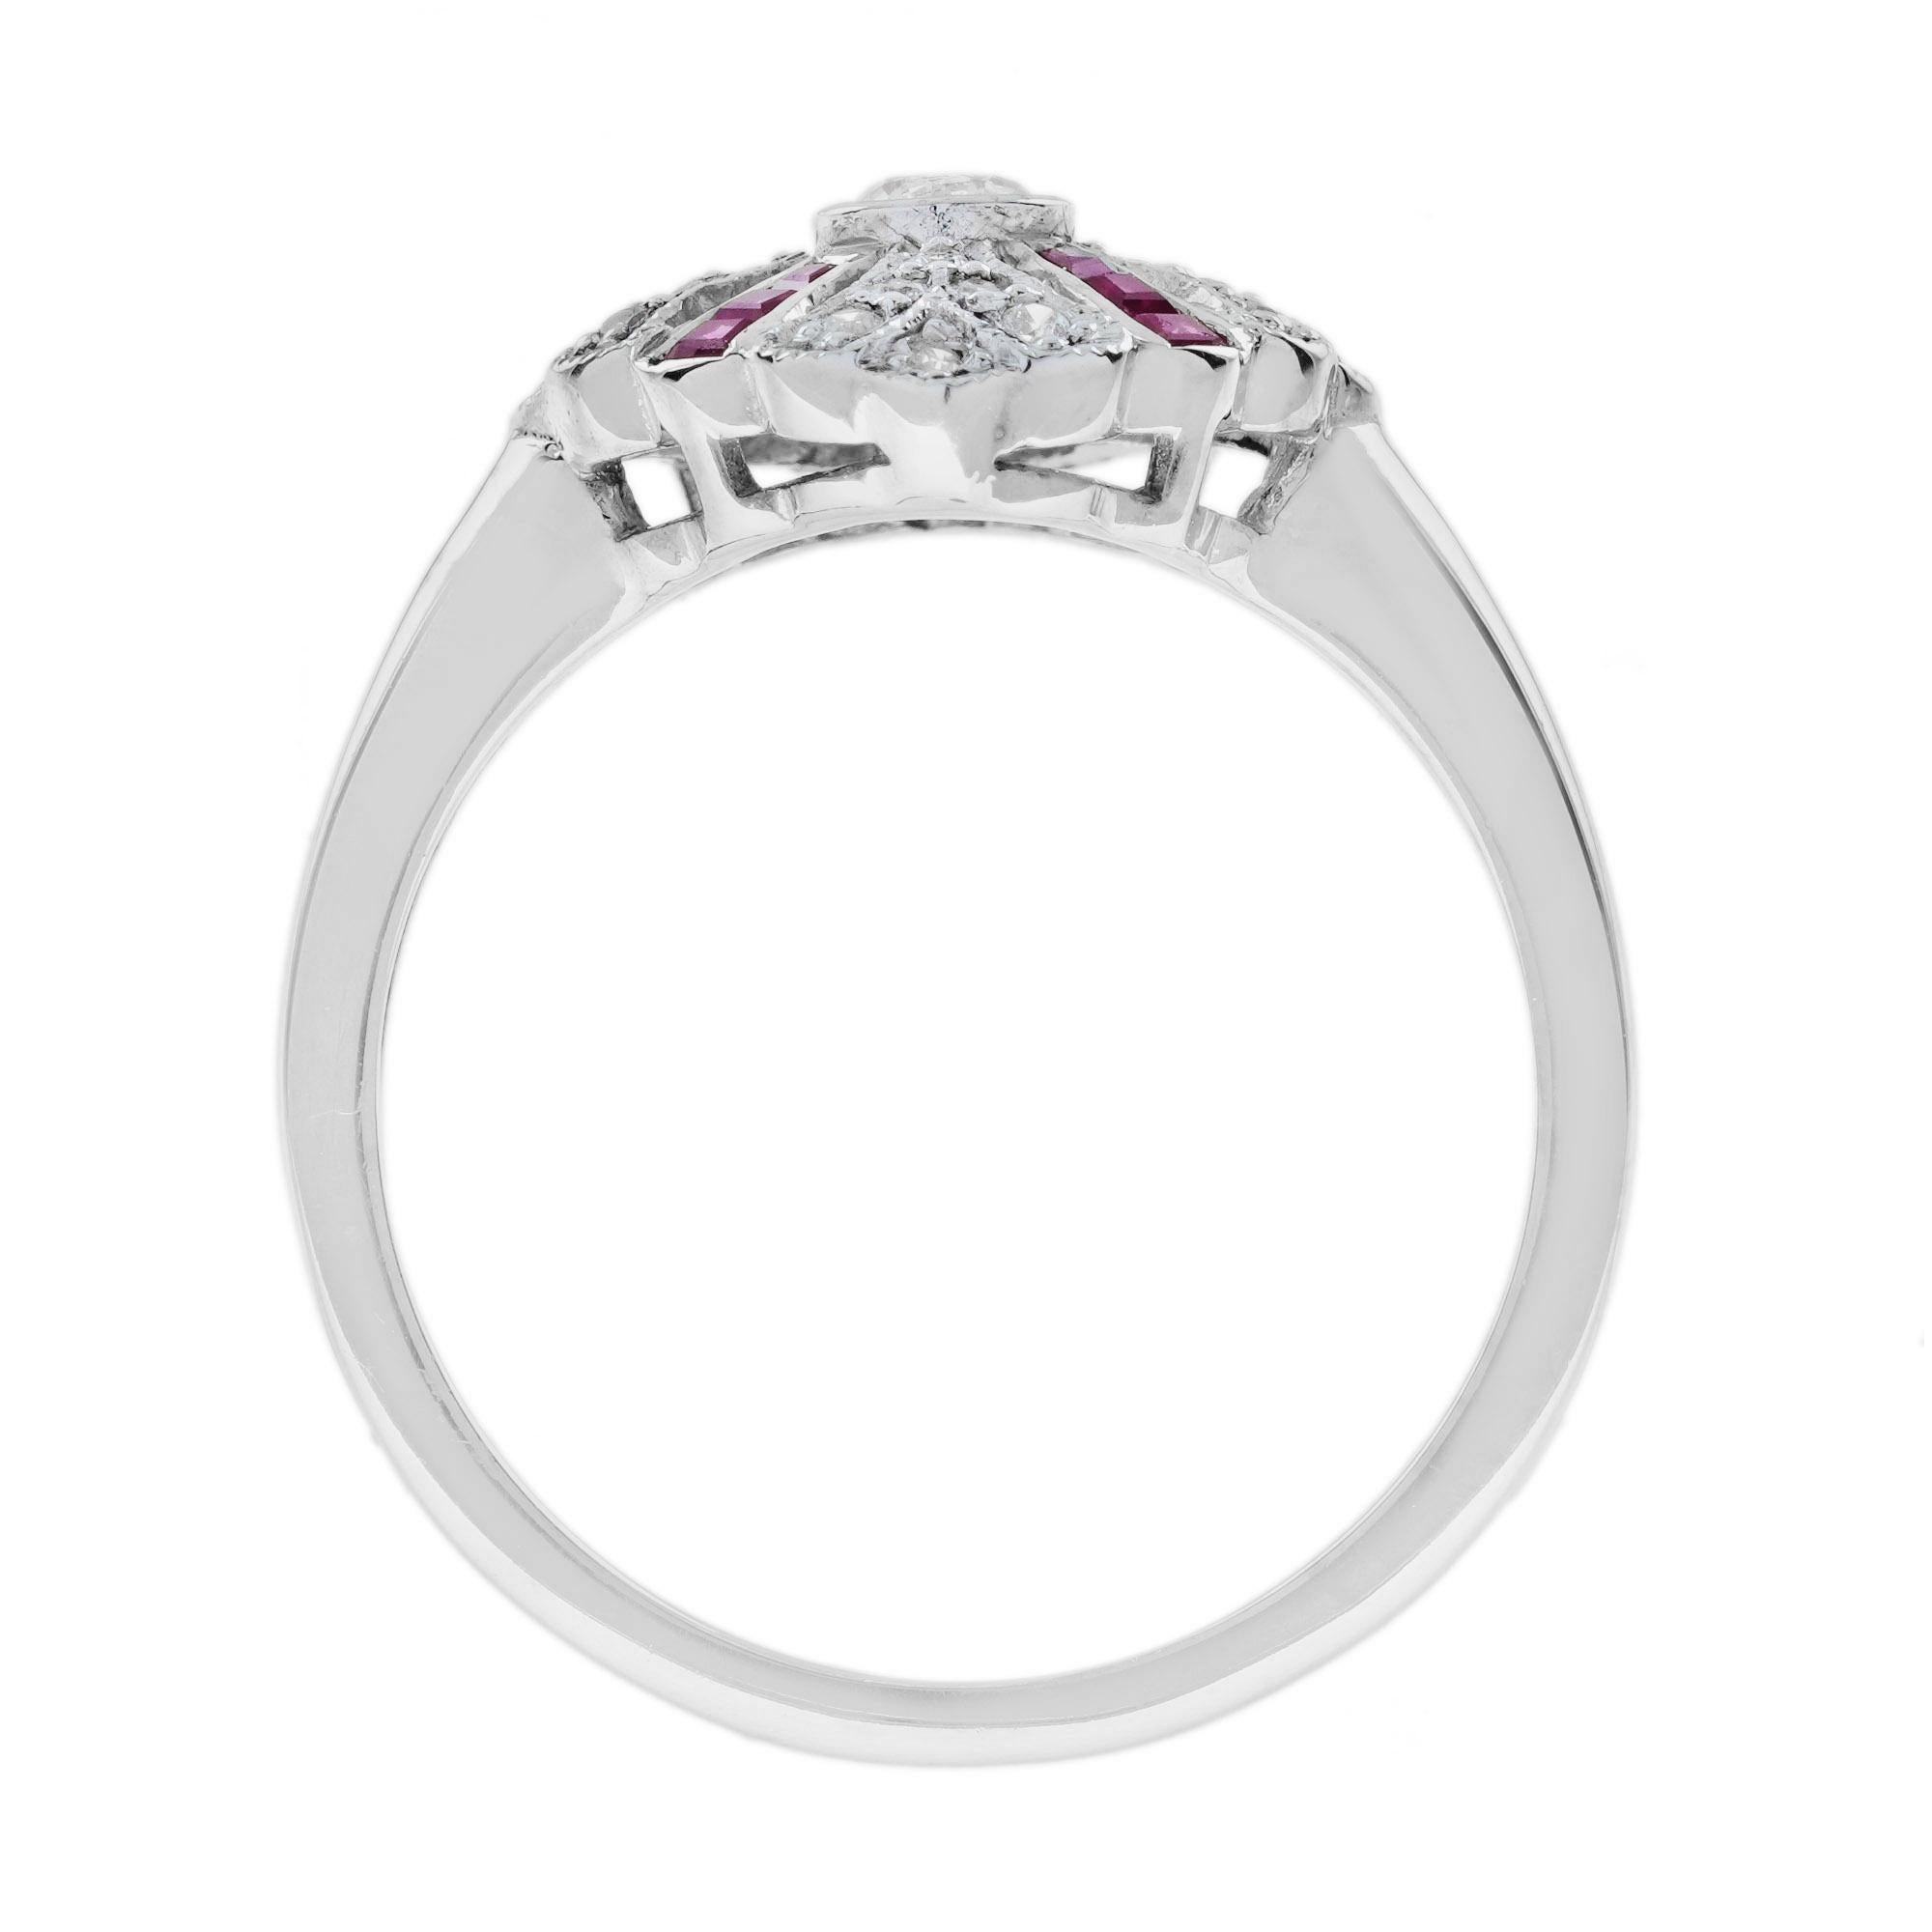 Diamond and Ruby Art Deco Style Engagement Ring in 14K White Gold For Sale 1